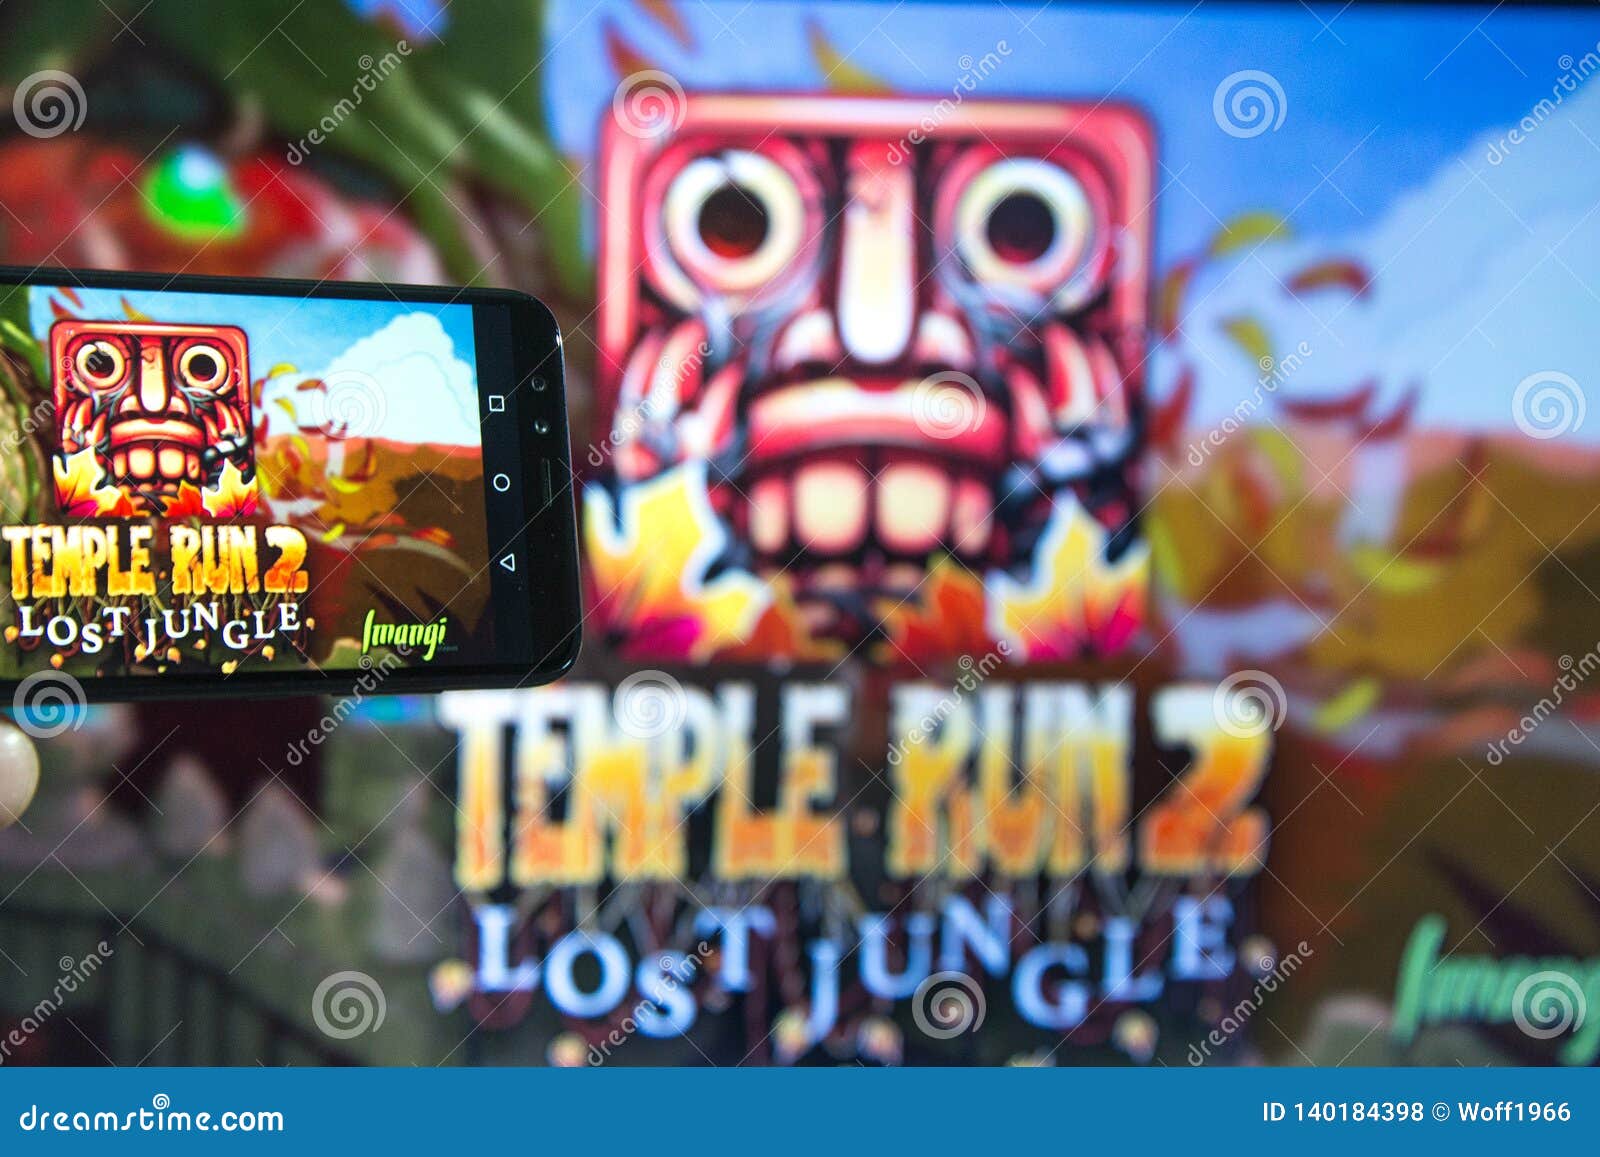 Temple Run 2 is now available on Android! - Jam Online